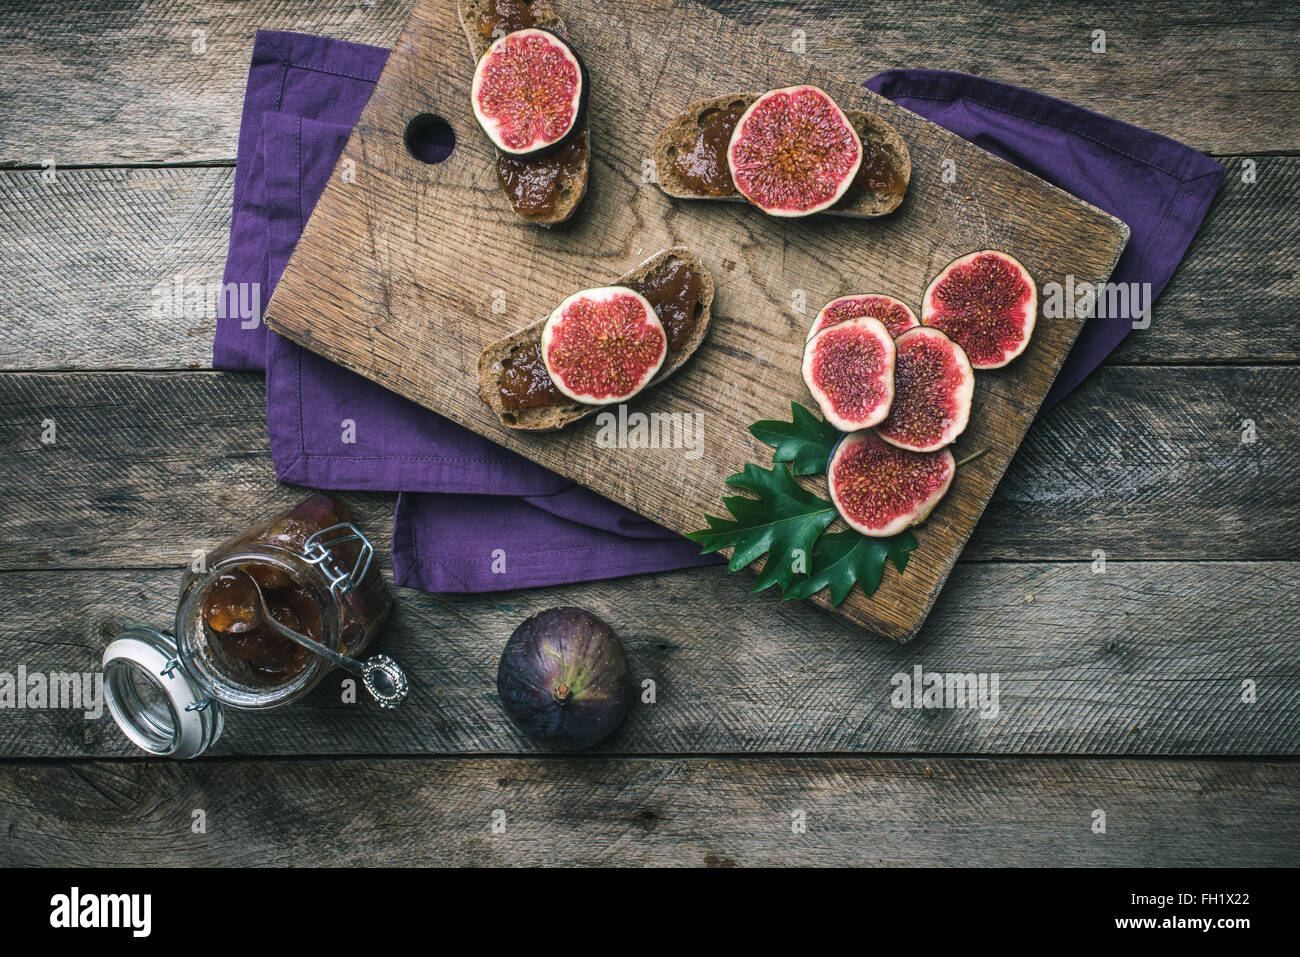 Cut figs and bread with jam on choppingboard in rustic style. Autumn season food photo Stock Photo